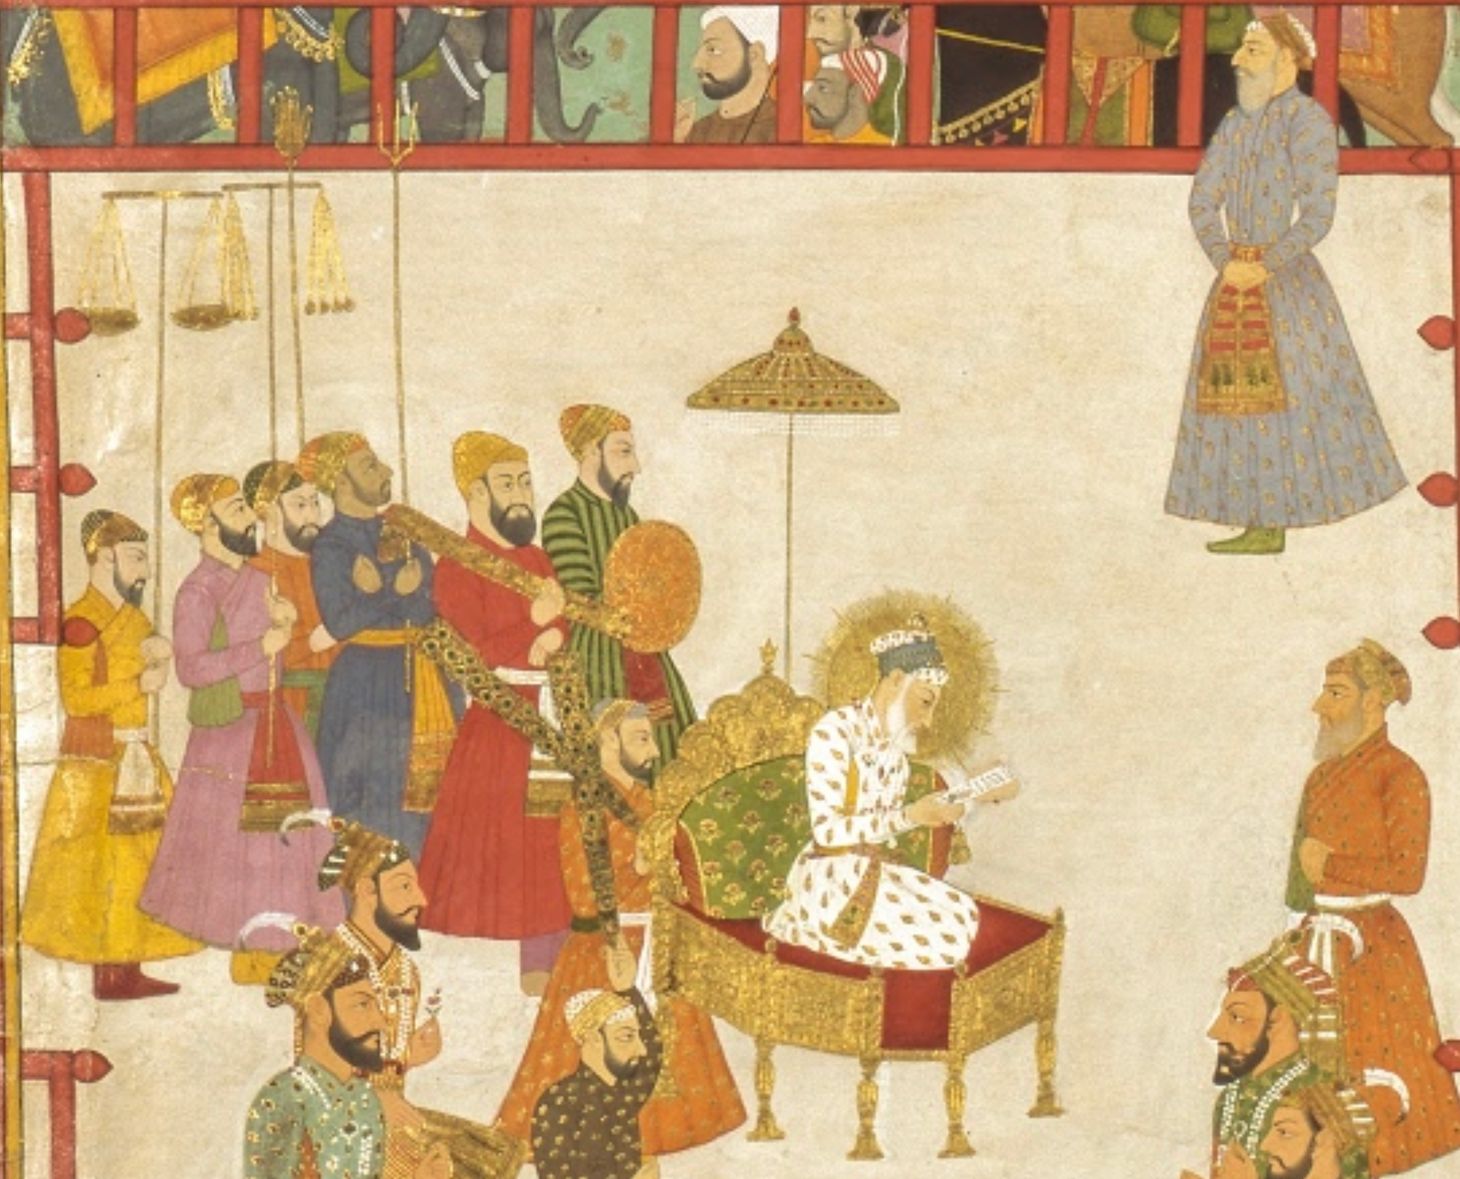 “Live in the Vale of Peace”: Religion and the Mughals During the Reign of Aurangzeb, 1658-1707